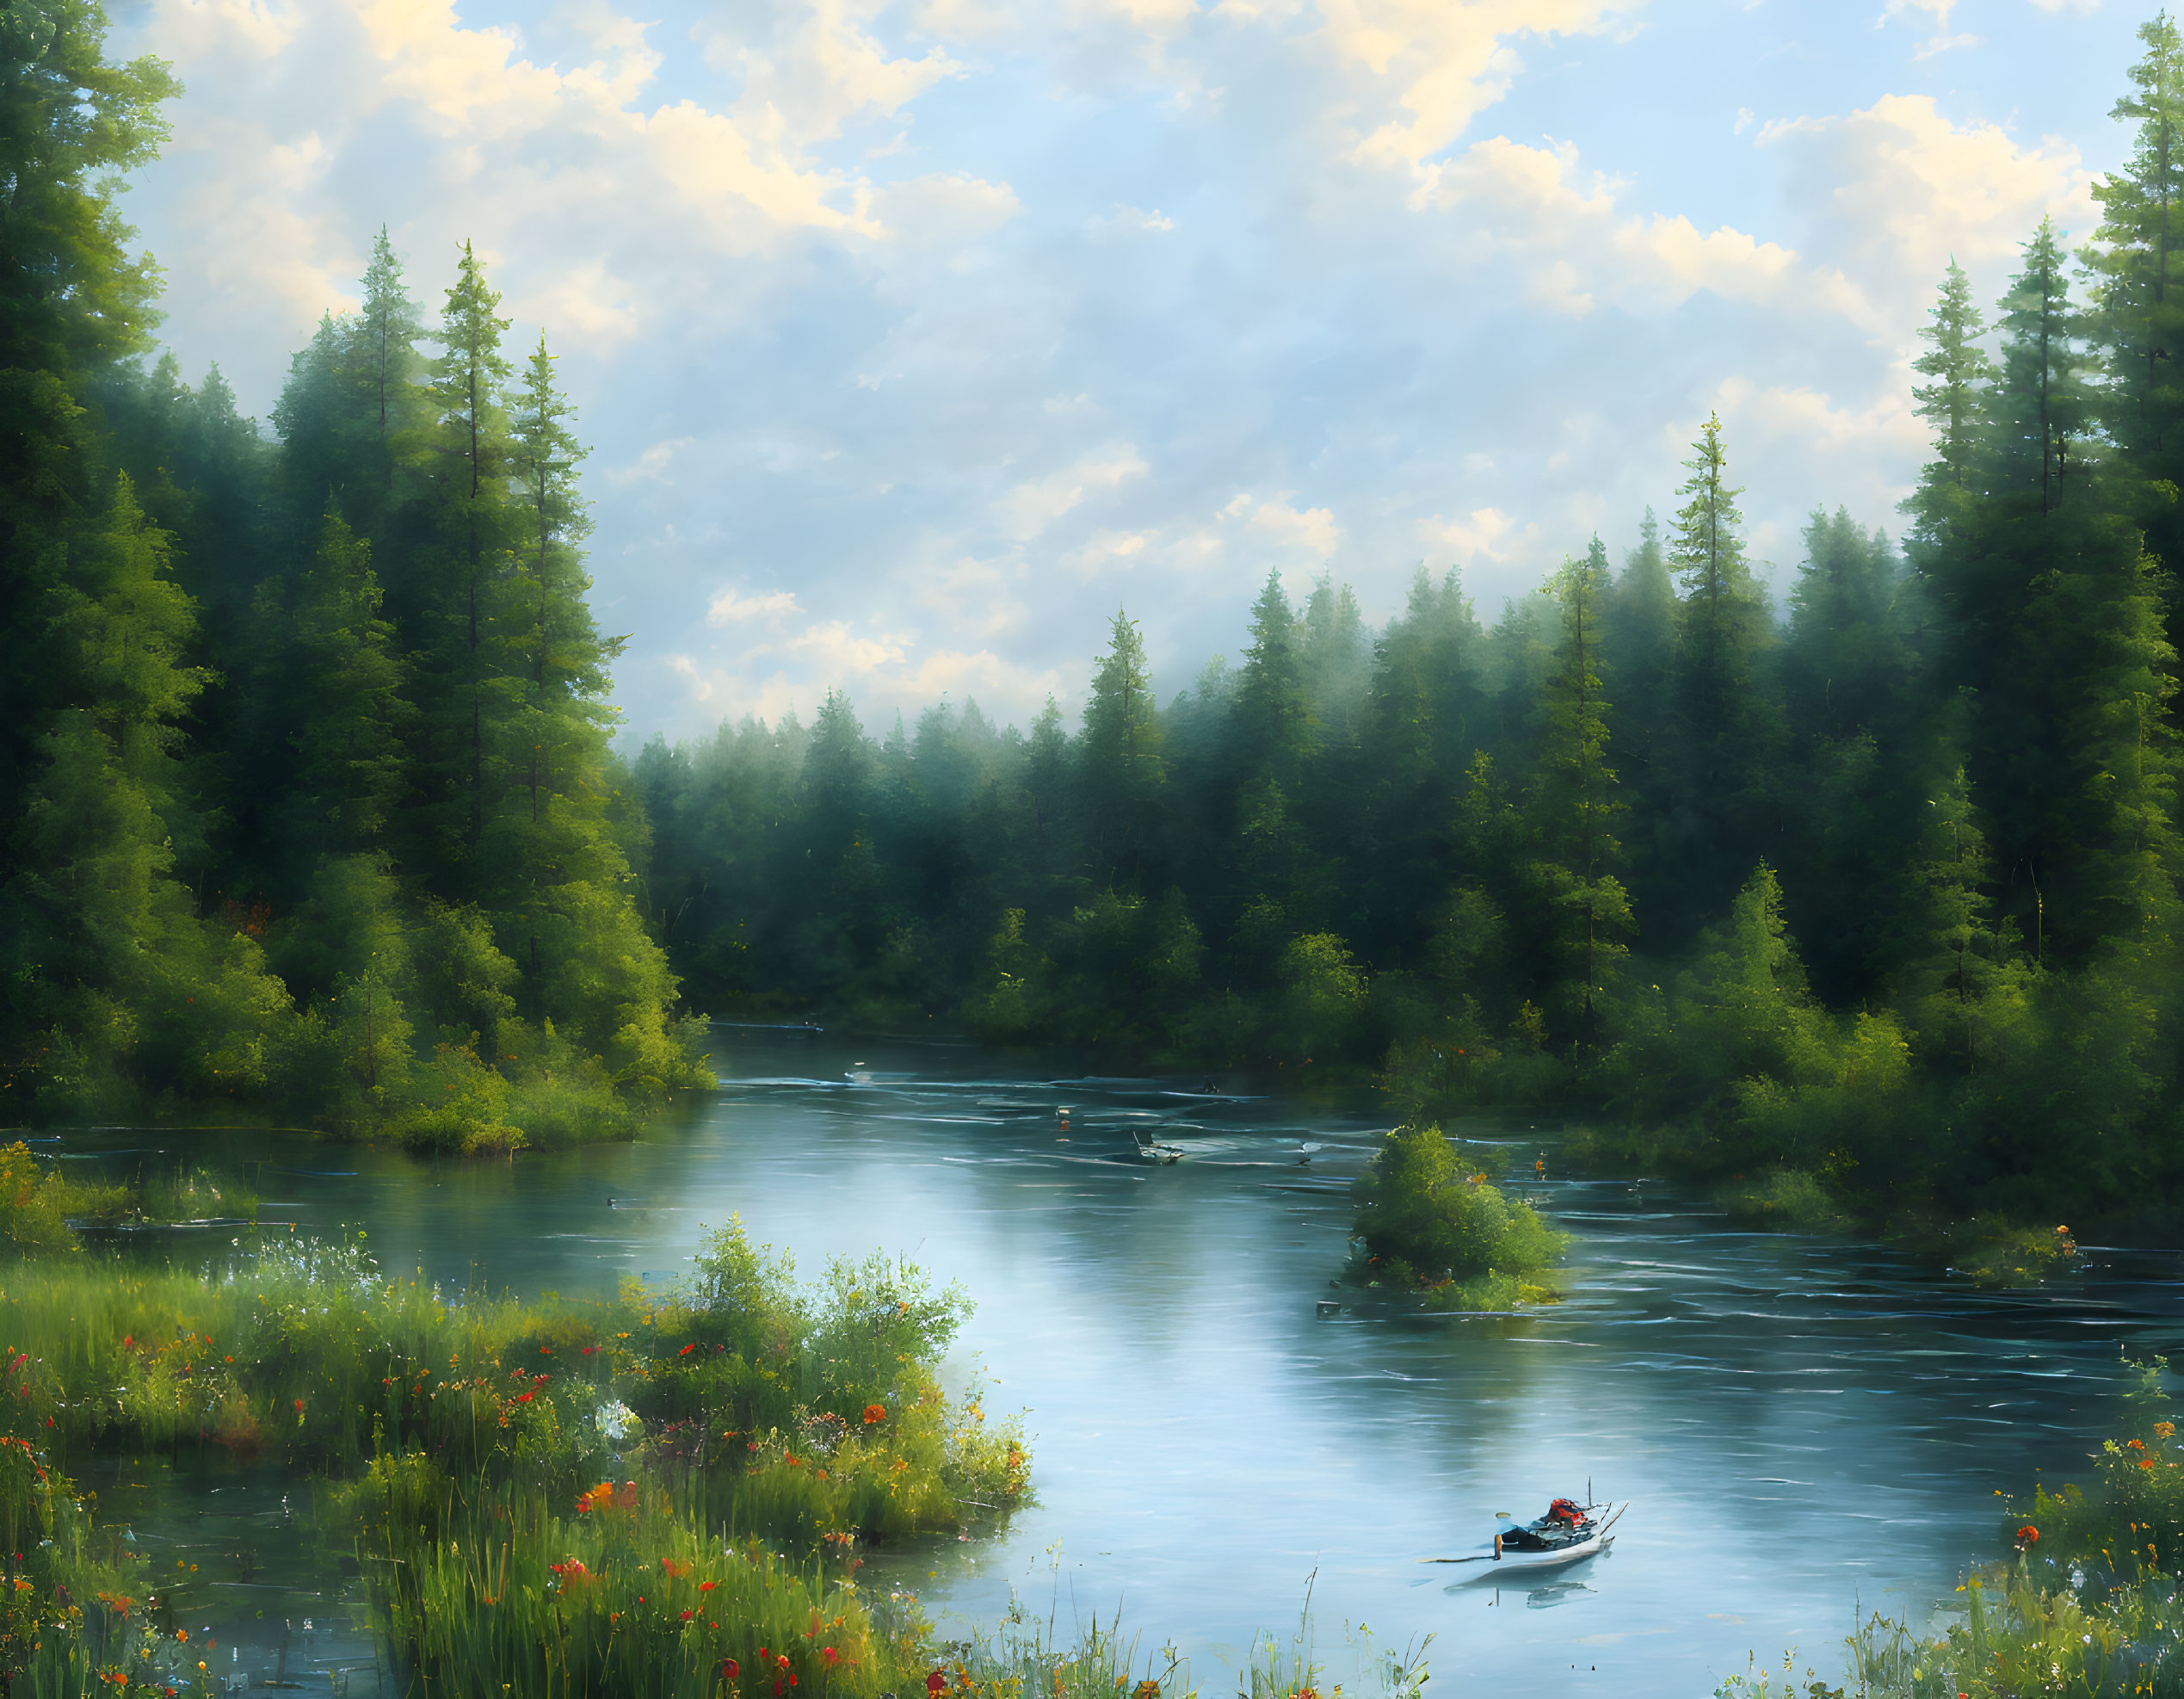 Tranquil river scene with rower in lush forest landscape